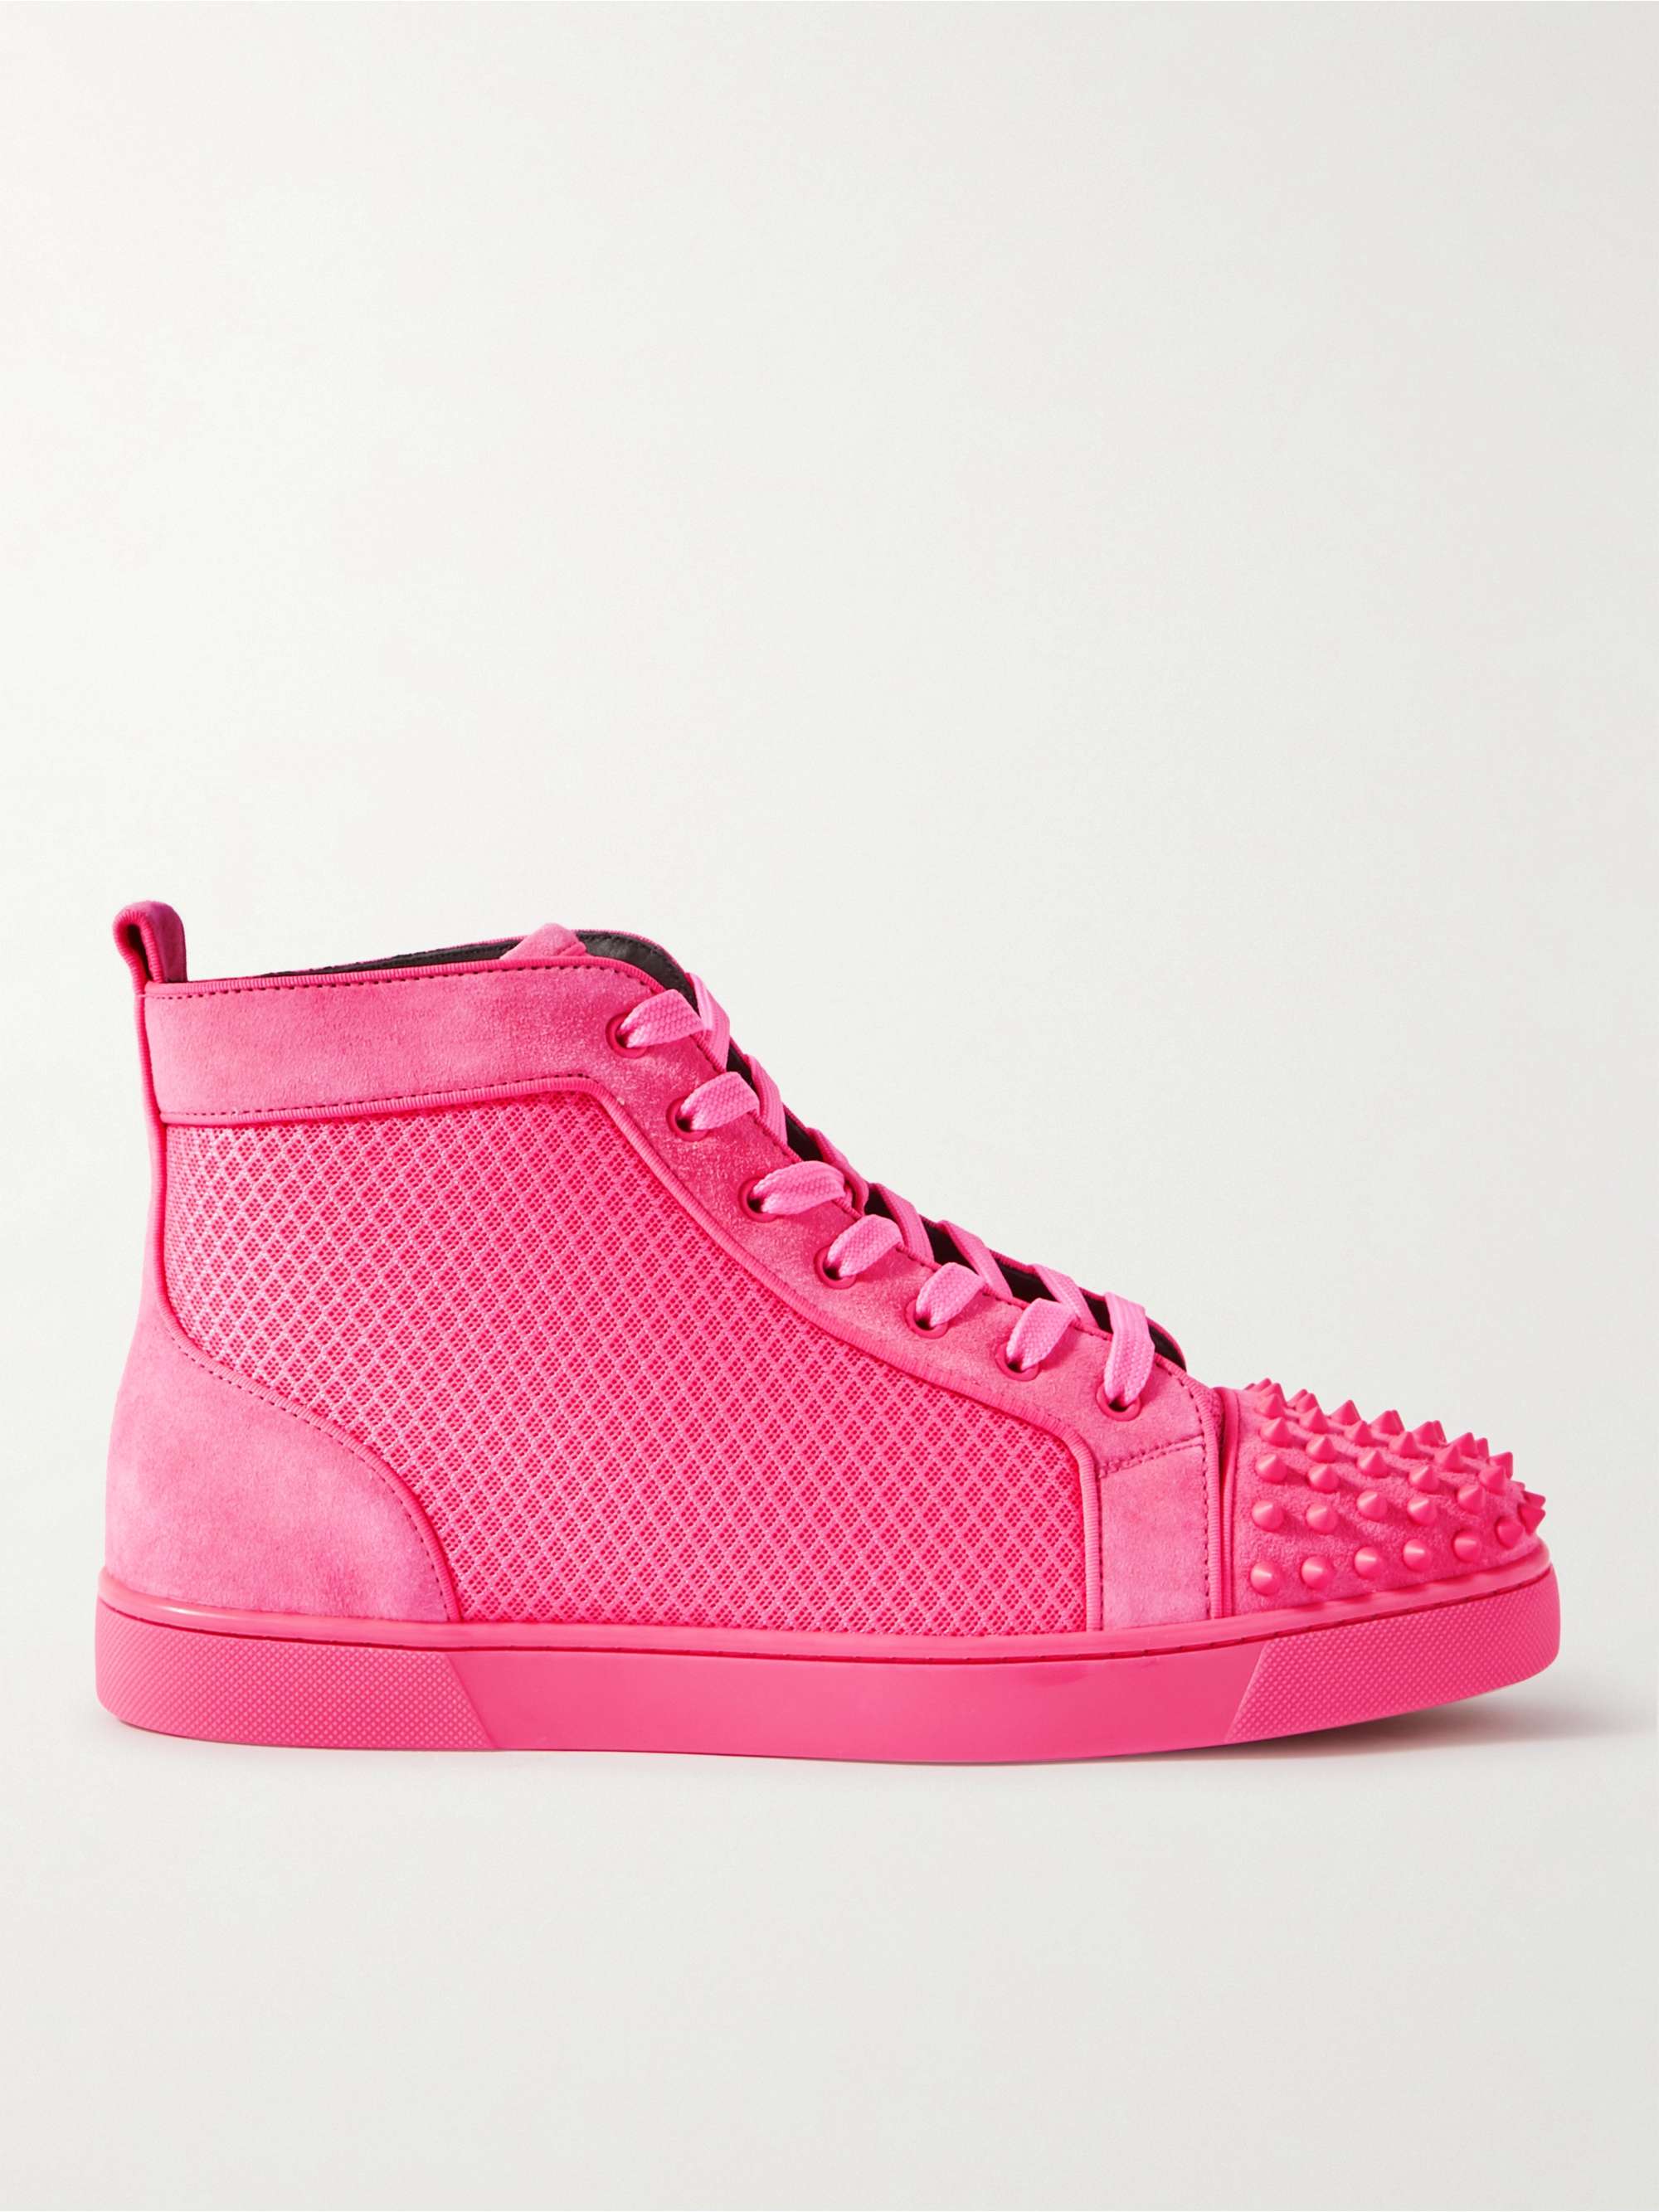 CHRISTIAN LOUBOUTIN Louis Spiked Suede-Trimmed Mesh High-Top Sneakers | MR  PORTER